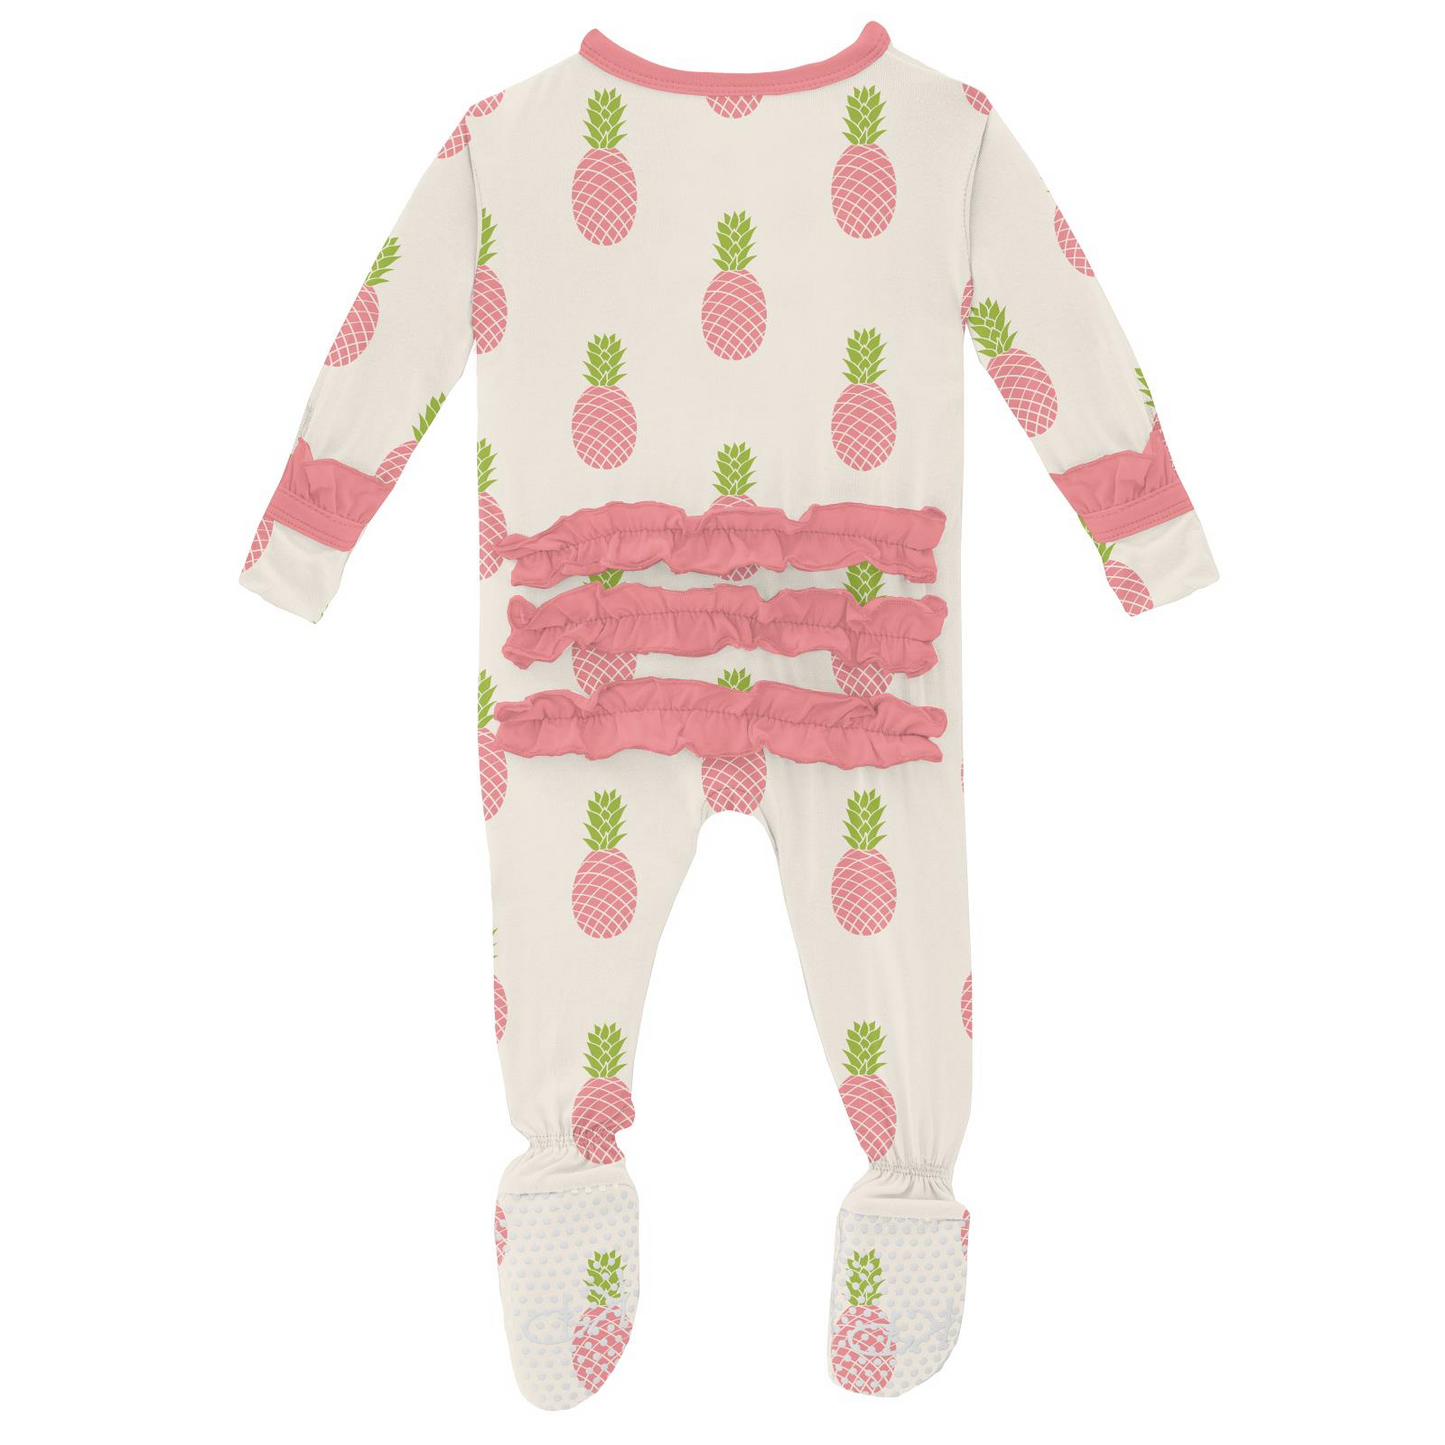 Print Classic Ruffle Footie with Zipper in Strawberry Pineapple